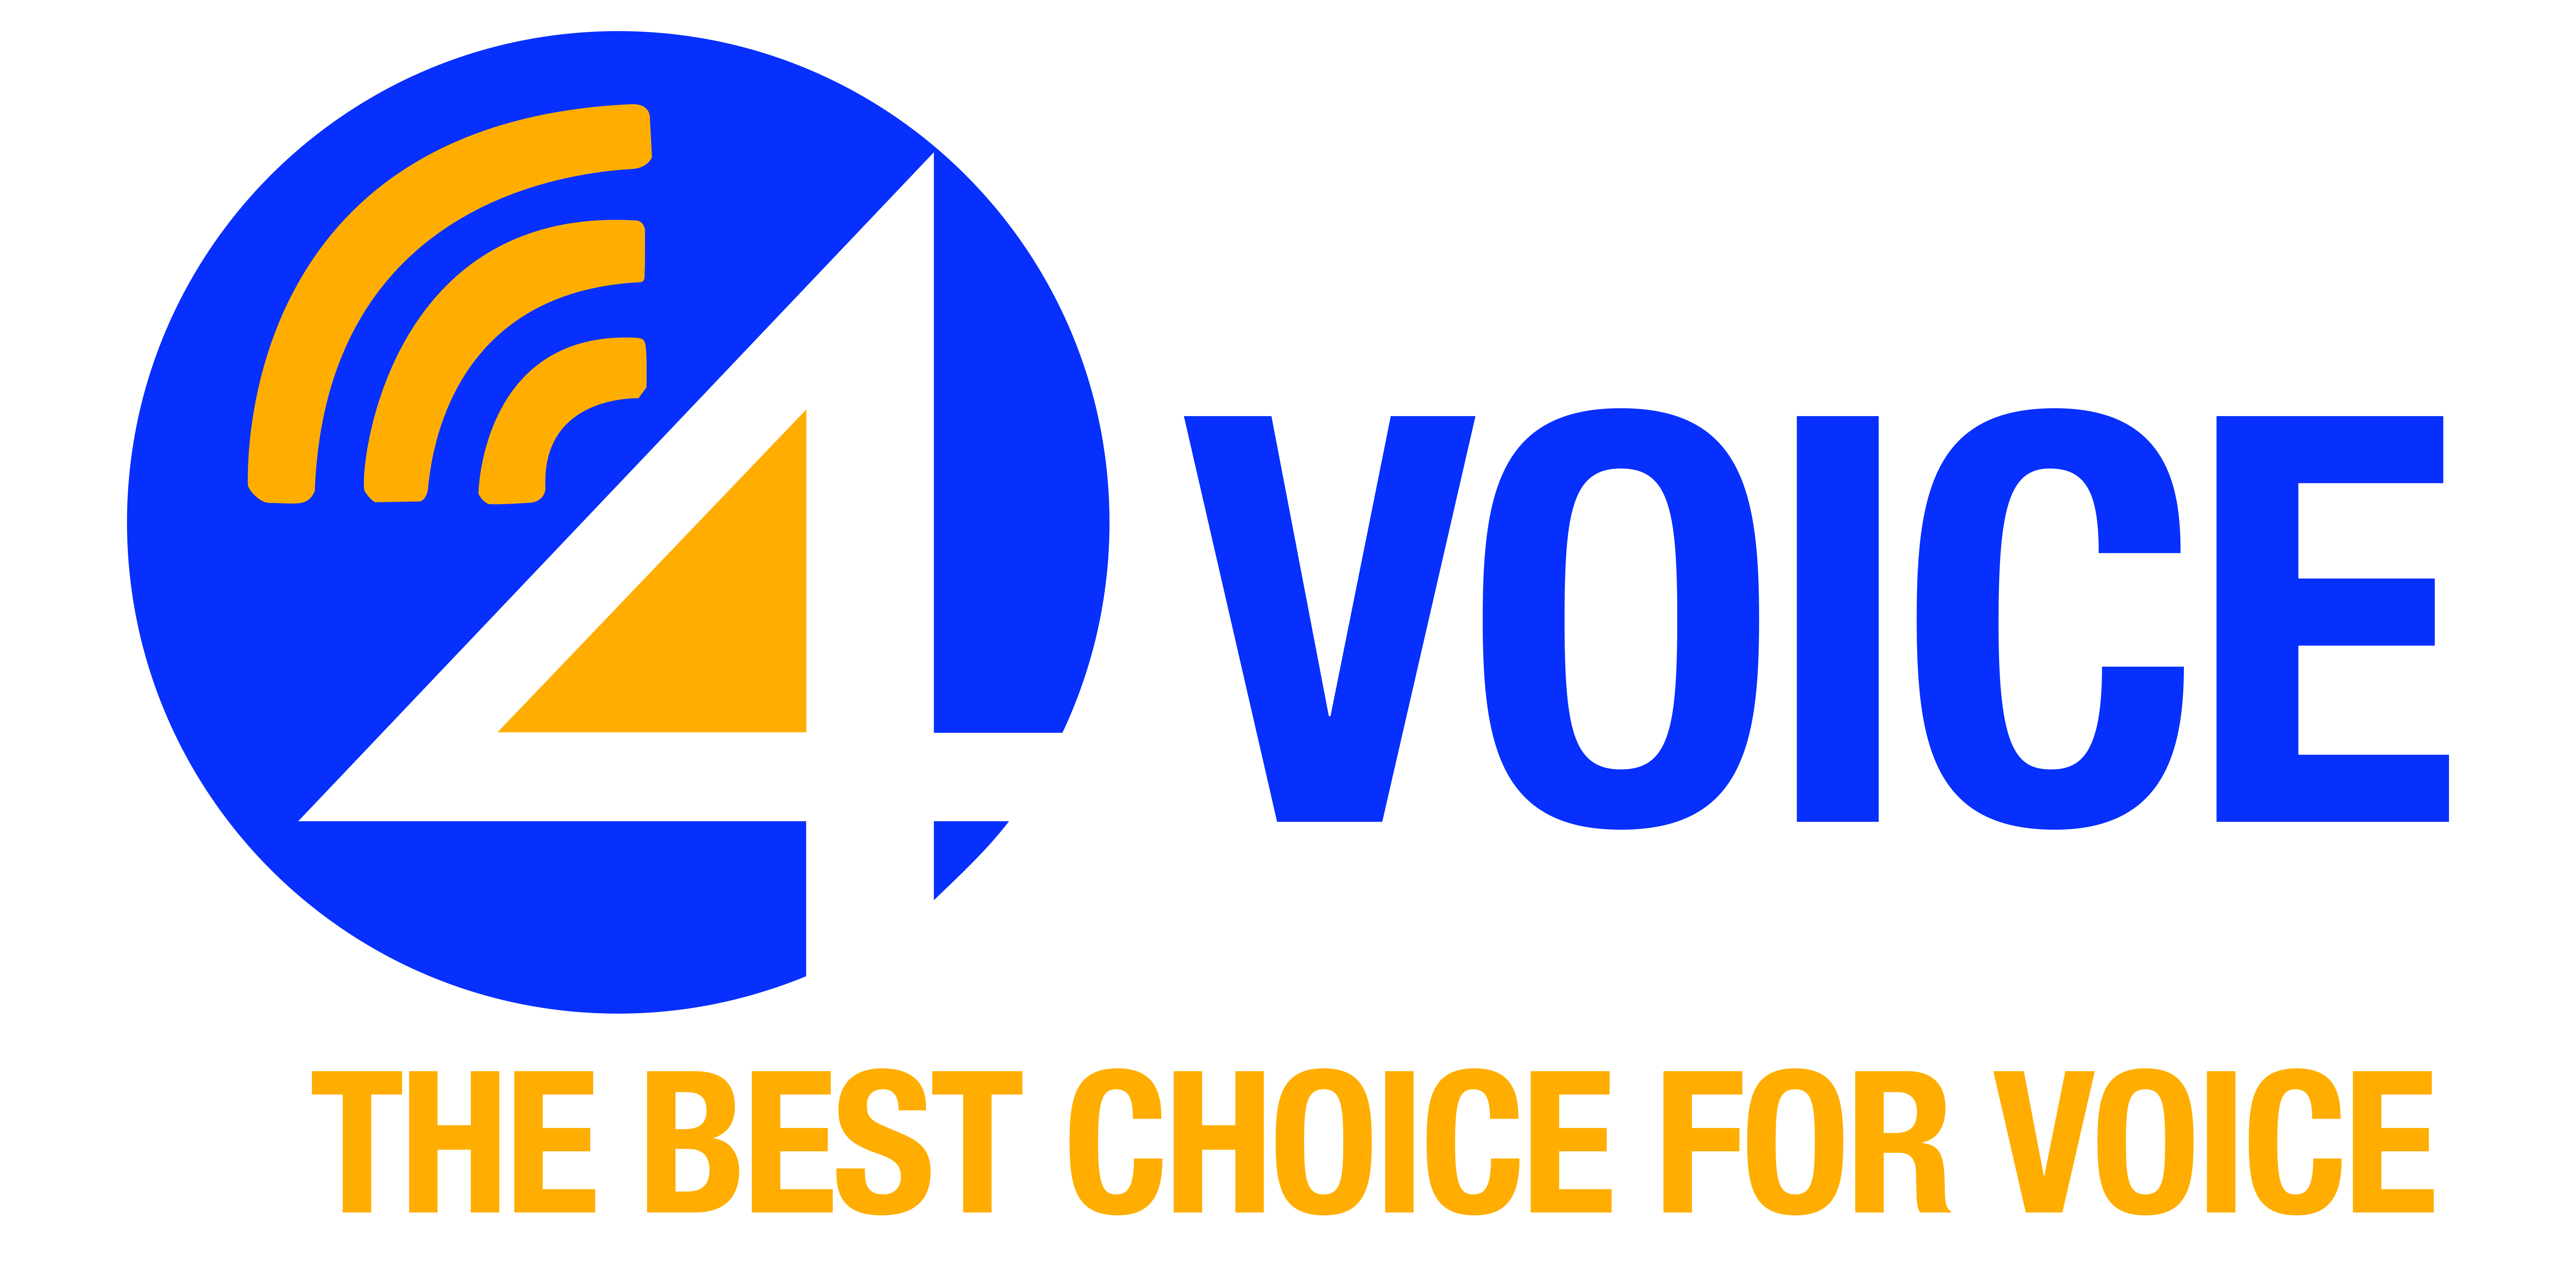 4 Voice The Best Choice for Voice